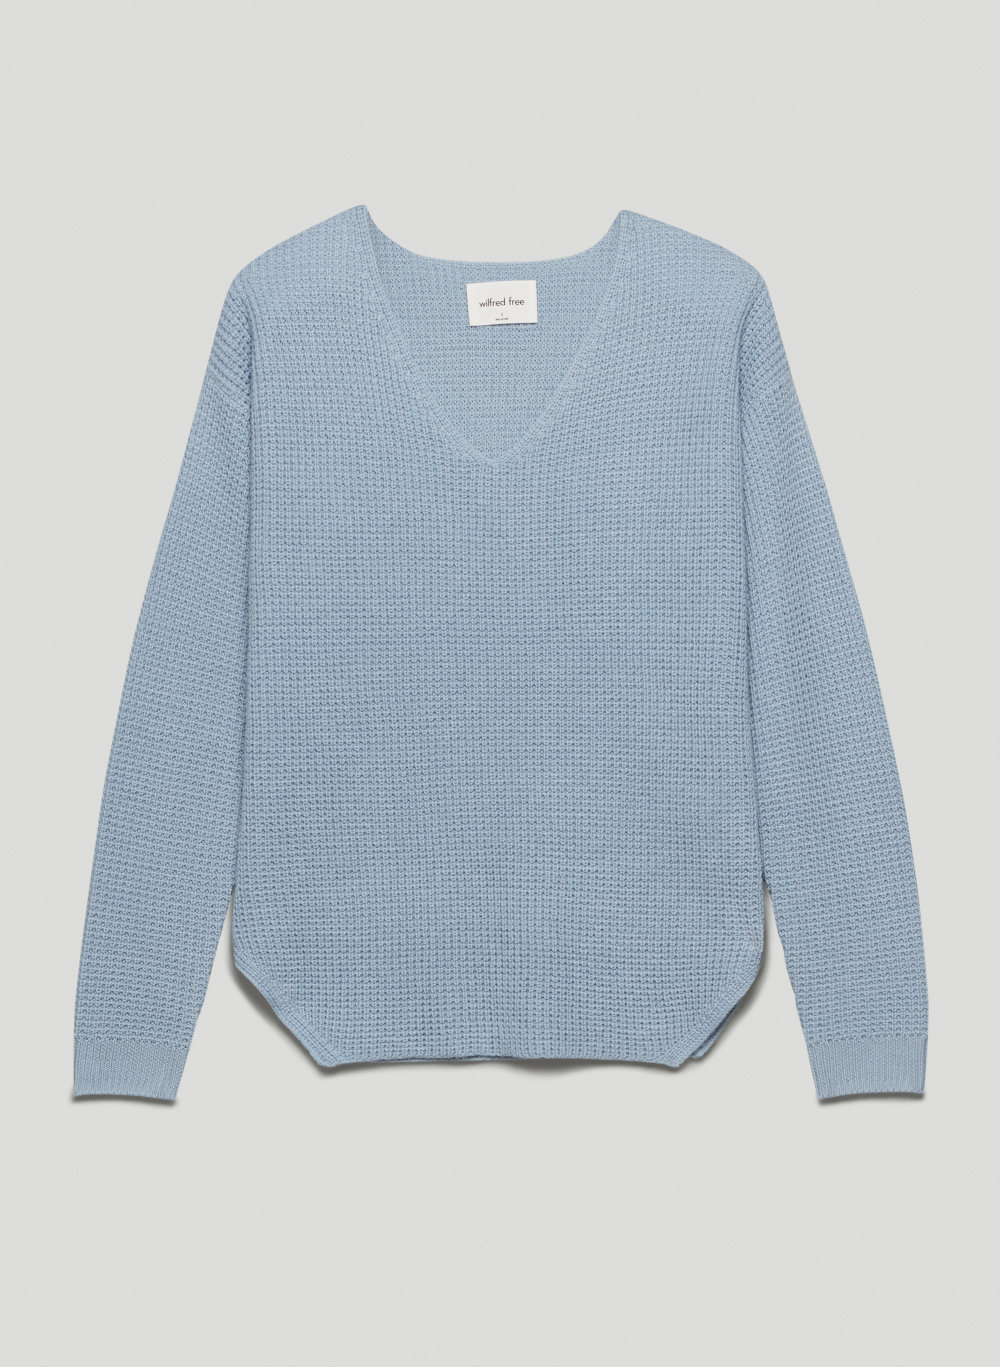 Wilfred Free WOLTER SWEATER | Aritzia INTL